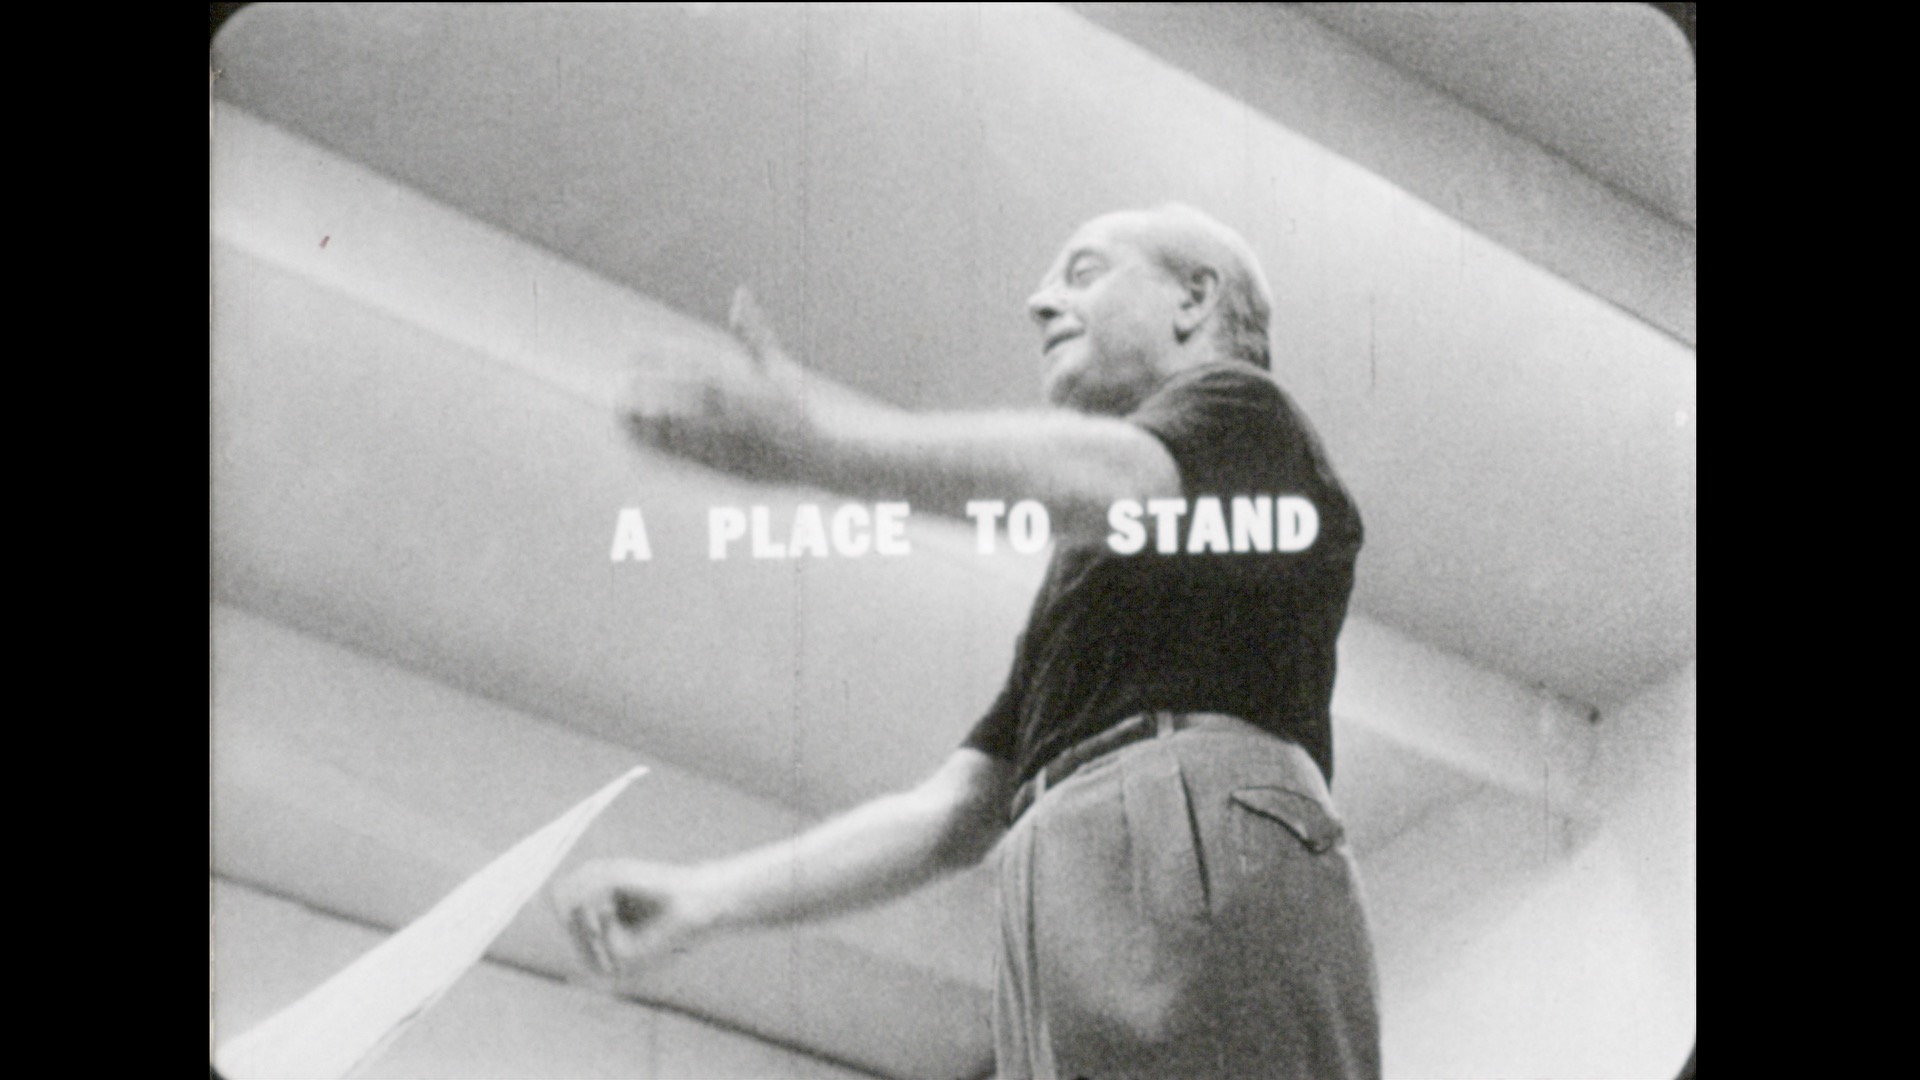 A Place to Stand, 1962-1963